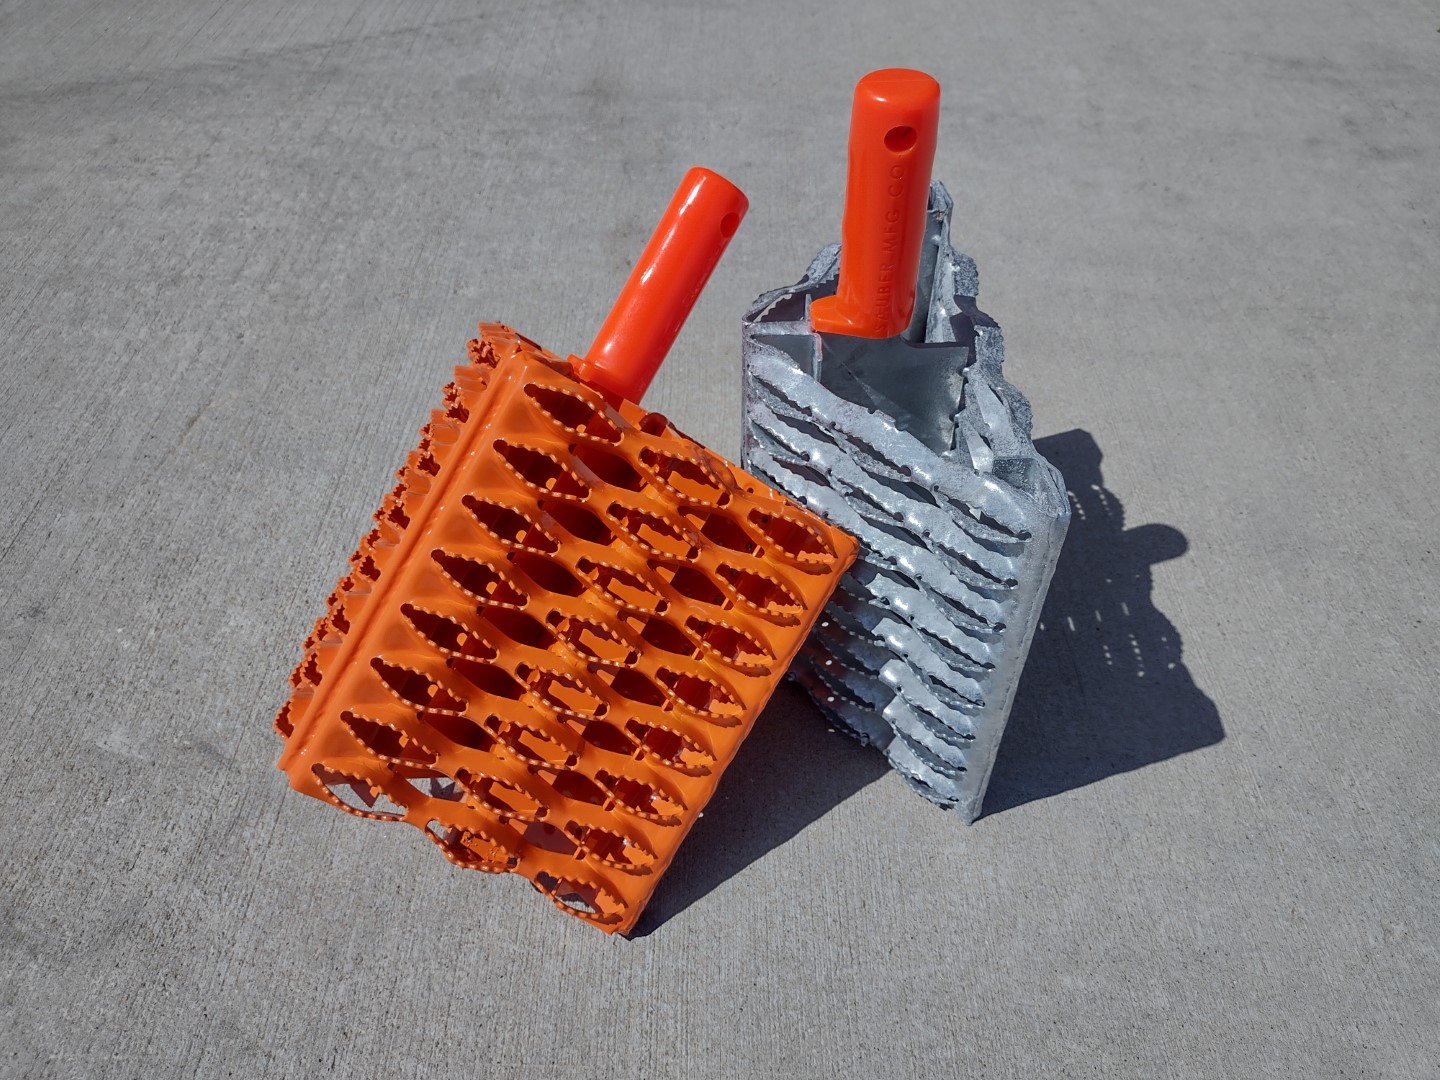 Two Galvanized Steel Wheel Chock with grip strut surfaces leaning against one another. One chock has natural galvanized finish. The other chock is powder coated florescent orange. These chocks have an orange urethane grip handle.